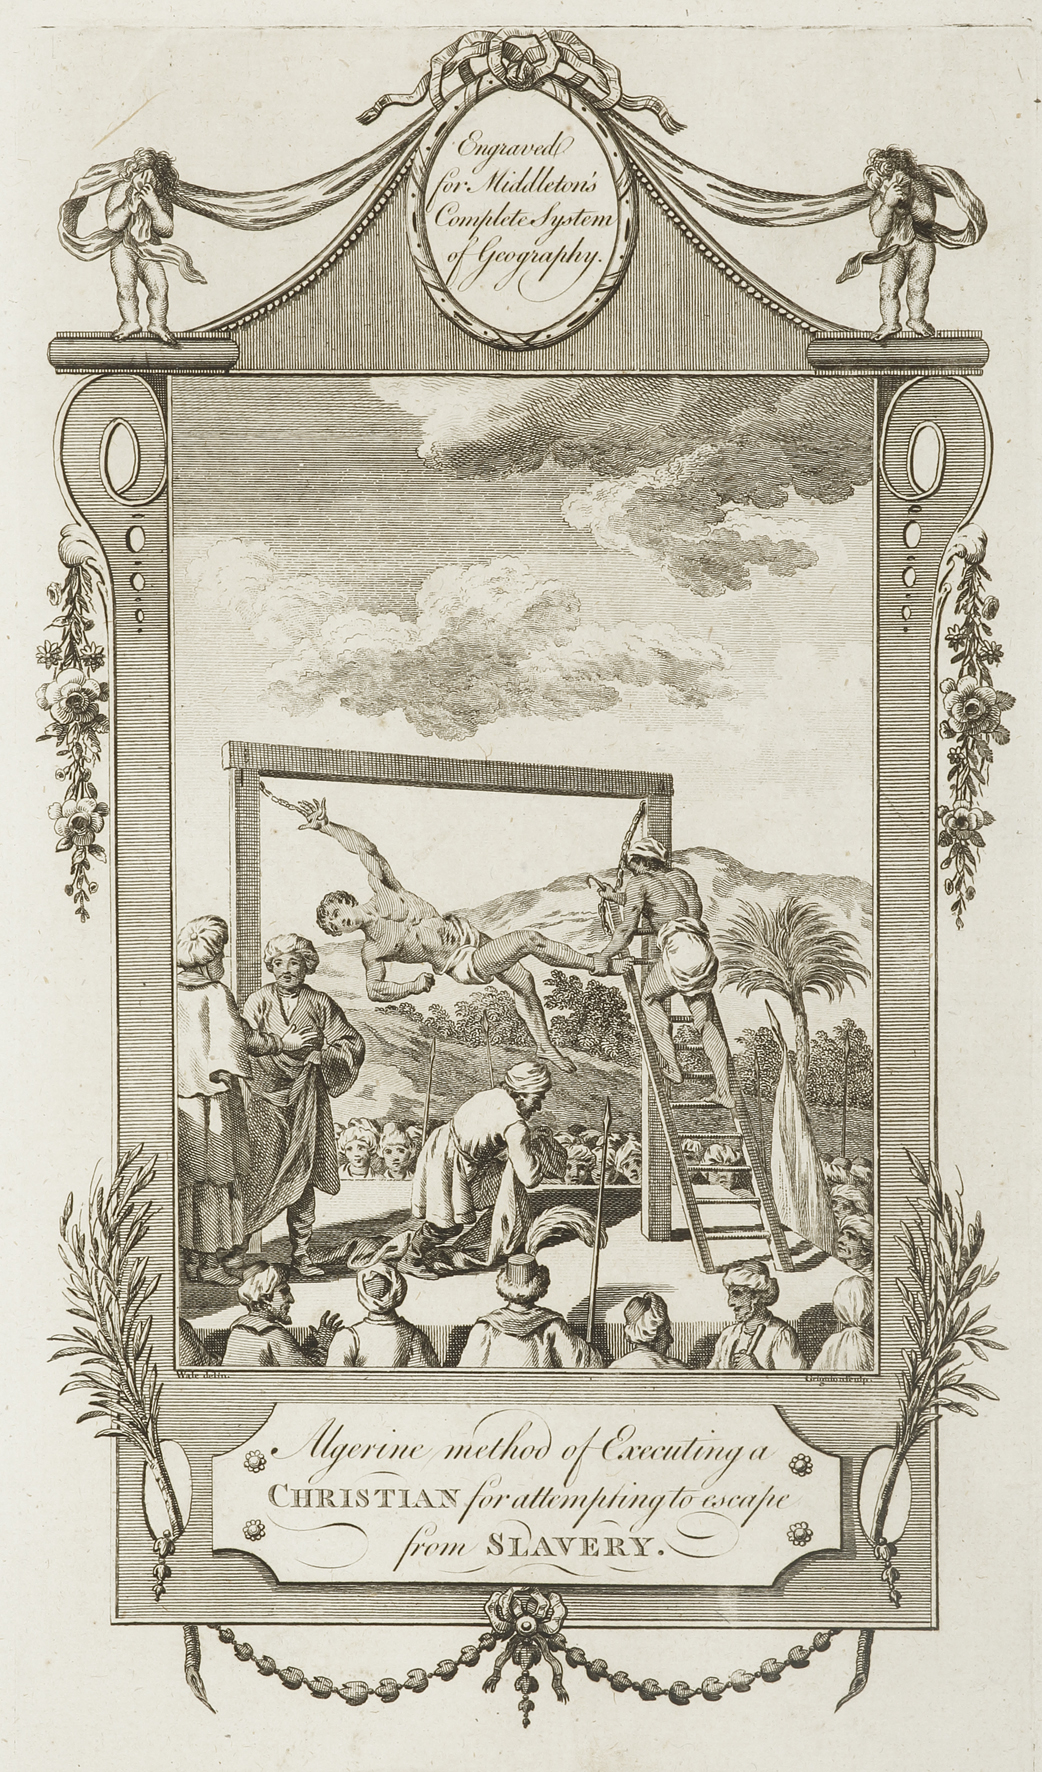 Algerian method of Executing a Christian for attempting to escape from Slavery. - Antique Print from 1778